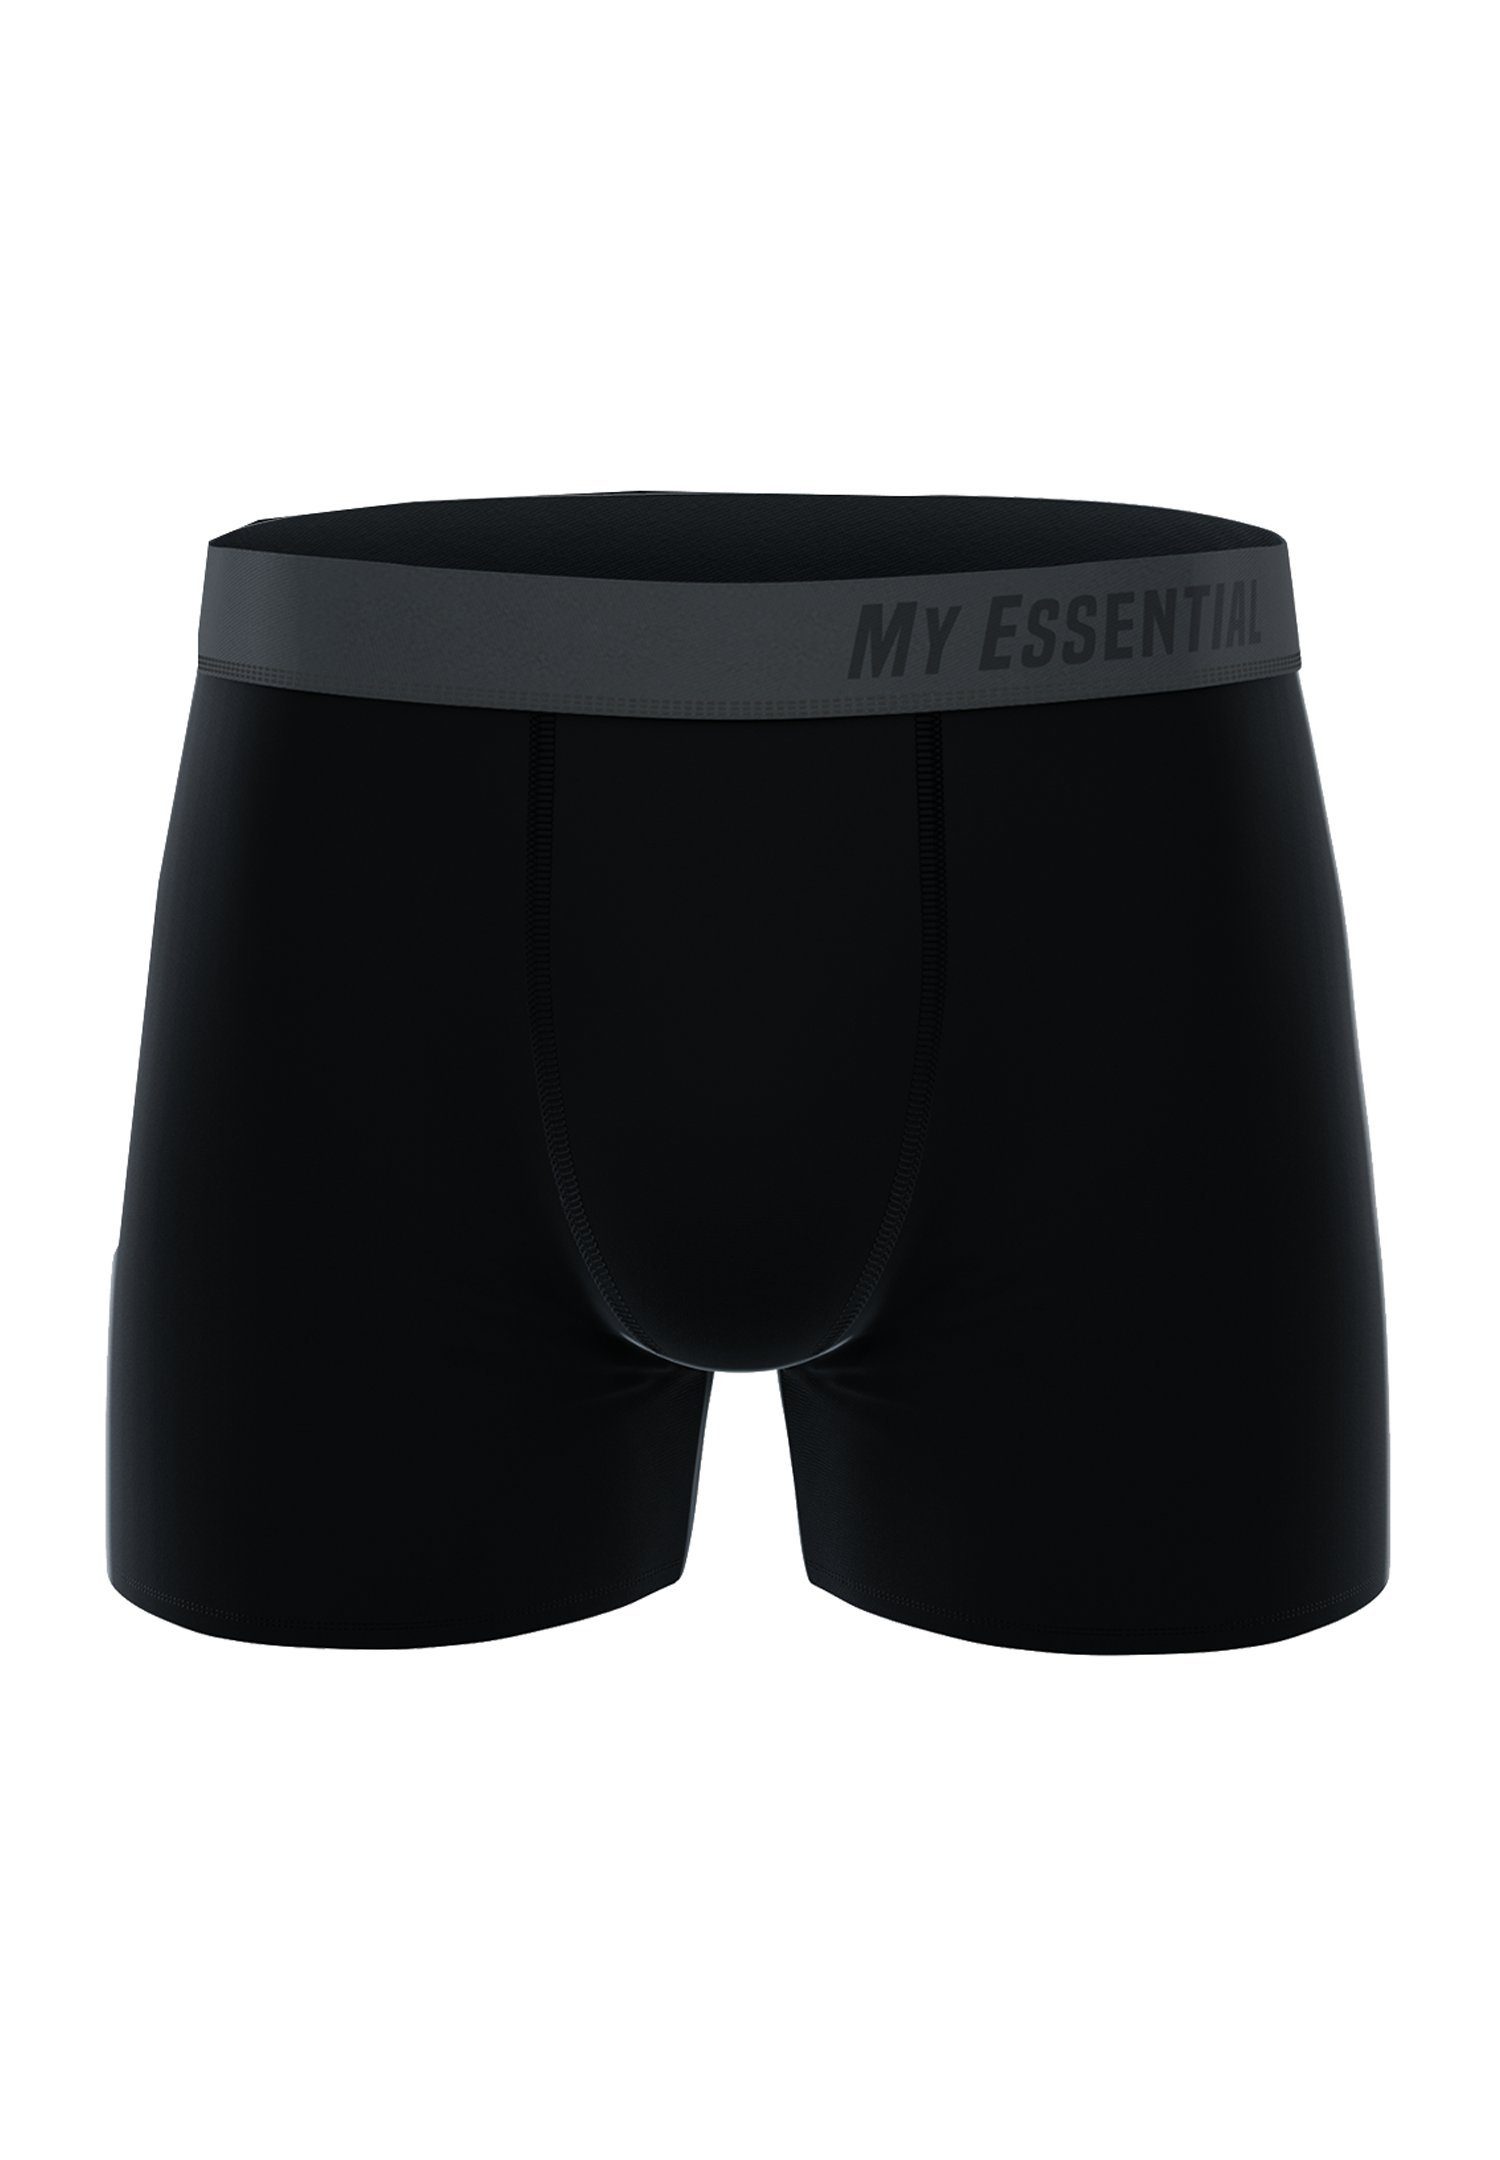 My 3er-Pack) Cotton My Essential Essential Black Boxershorts 3 Clothing Pack Bio (Spar-Pack, Boxers 3-St.,